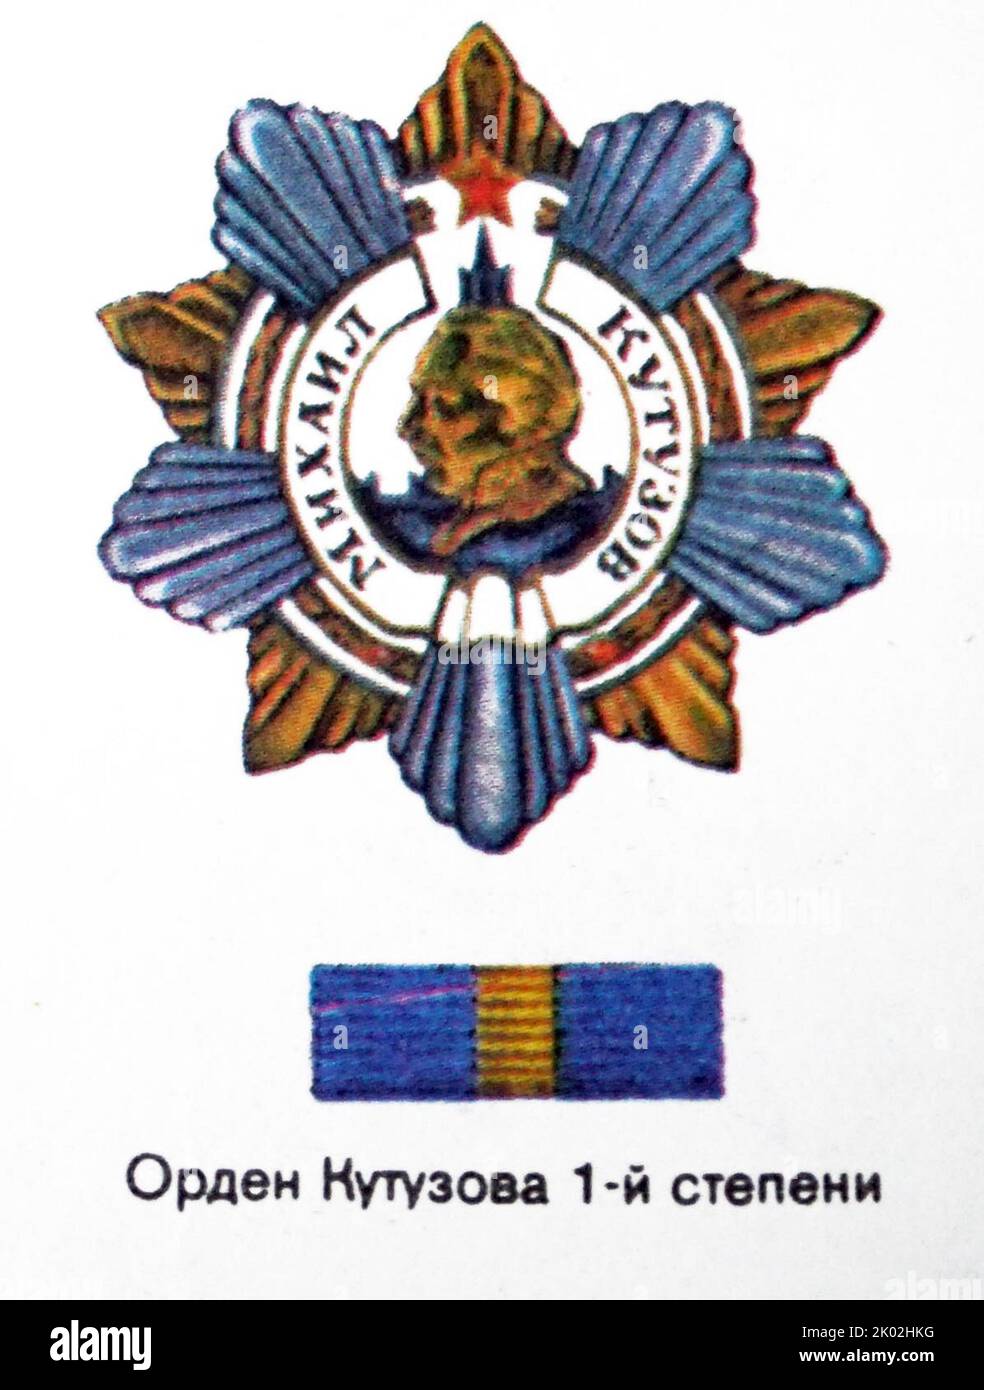 The Order of Kutuzov is a military decoration of the Russian Federation named after famous Russian Field Marshal Mikhail Illarionovich Kutuzov (1745-1813). The Order was established during World War II to reward senior Red Army officers Stock Photo